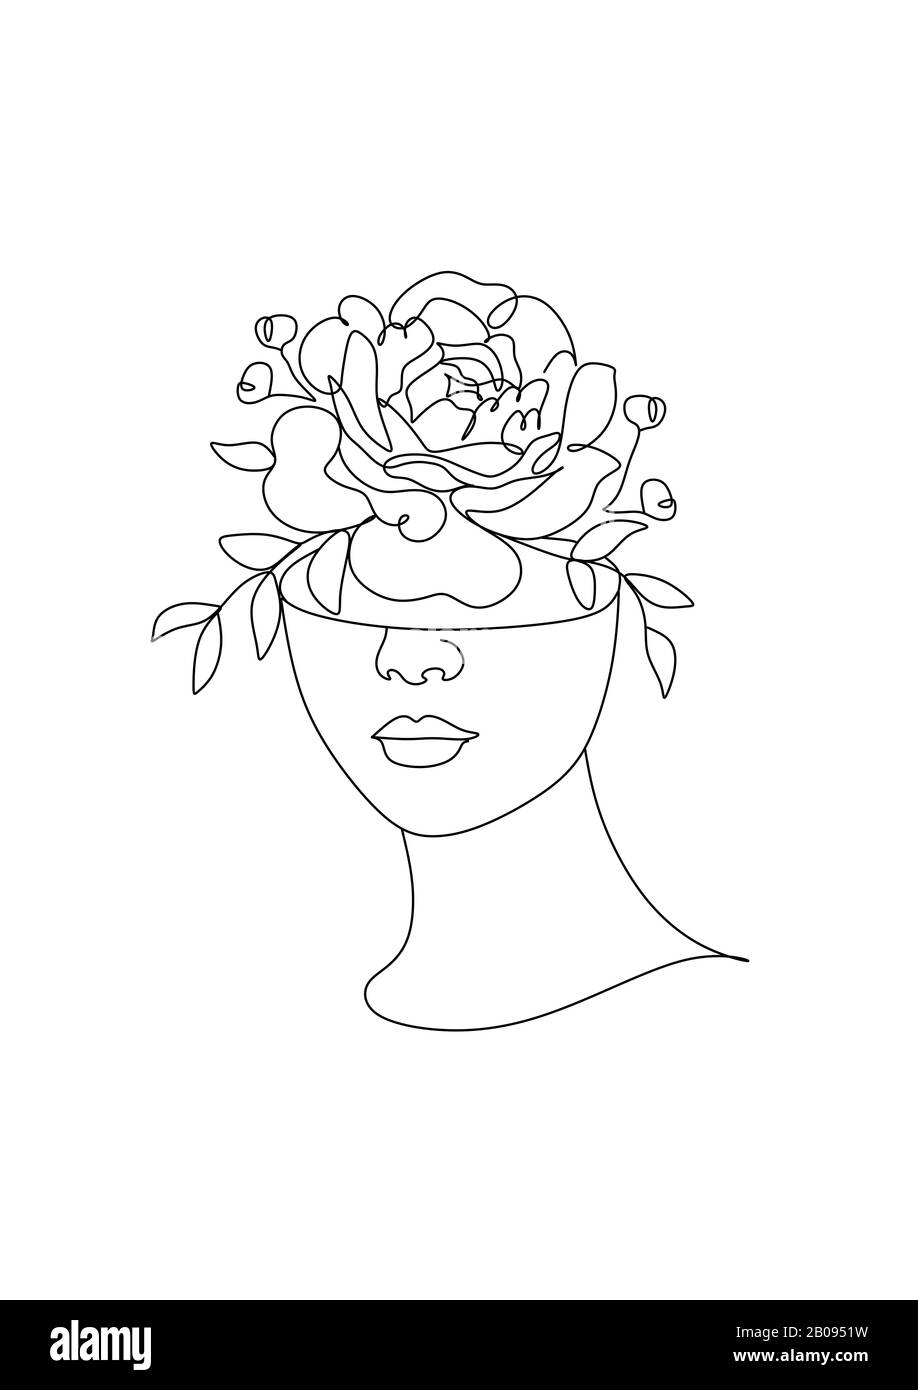 https://c8.alamy.com/comp/2B0951W/woman-nature-line-drawing-girl-with-leaves-vector-save-nature-earth-day-abstract-face-with-flowers-by-one-line-vector-drawing-portrait-minimalist-2B0951W.jpg